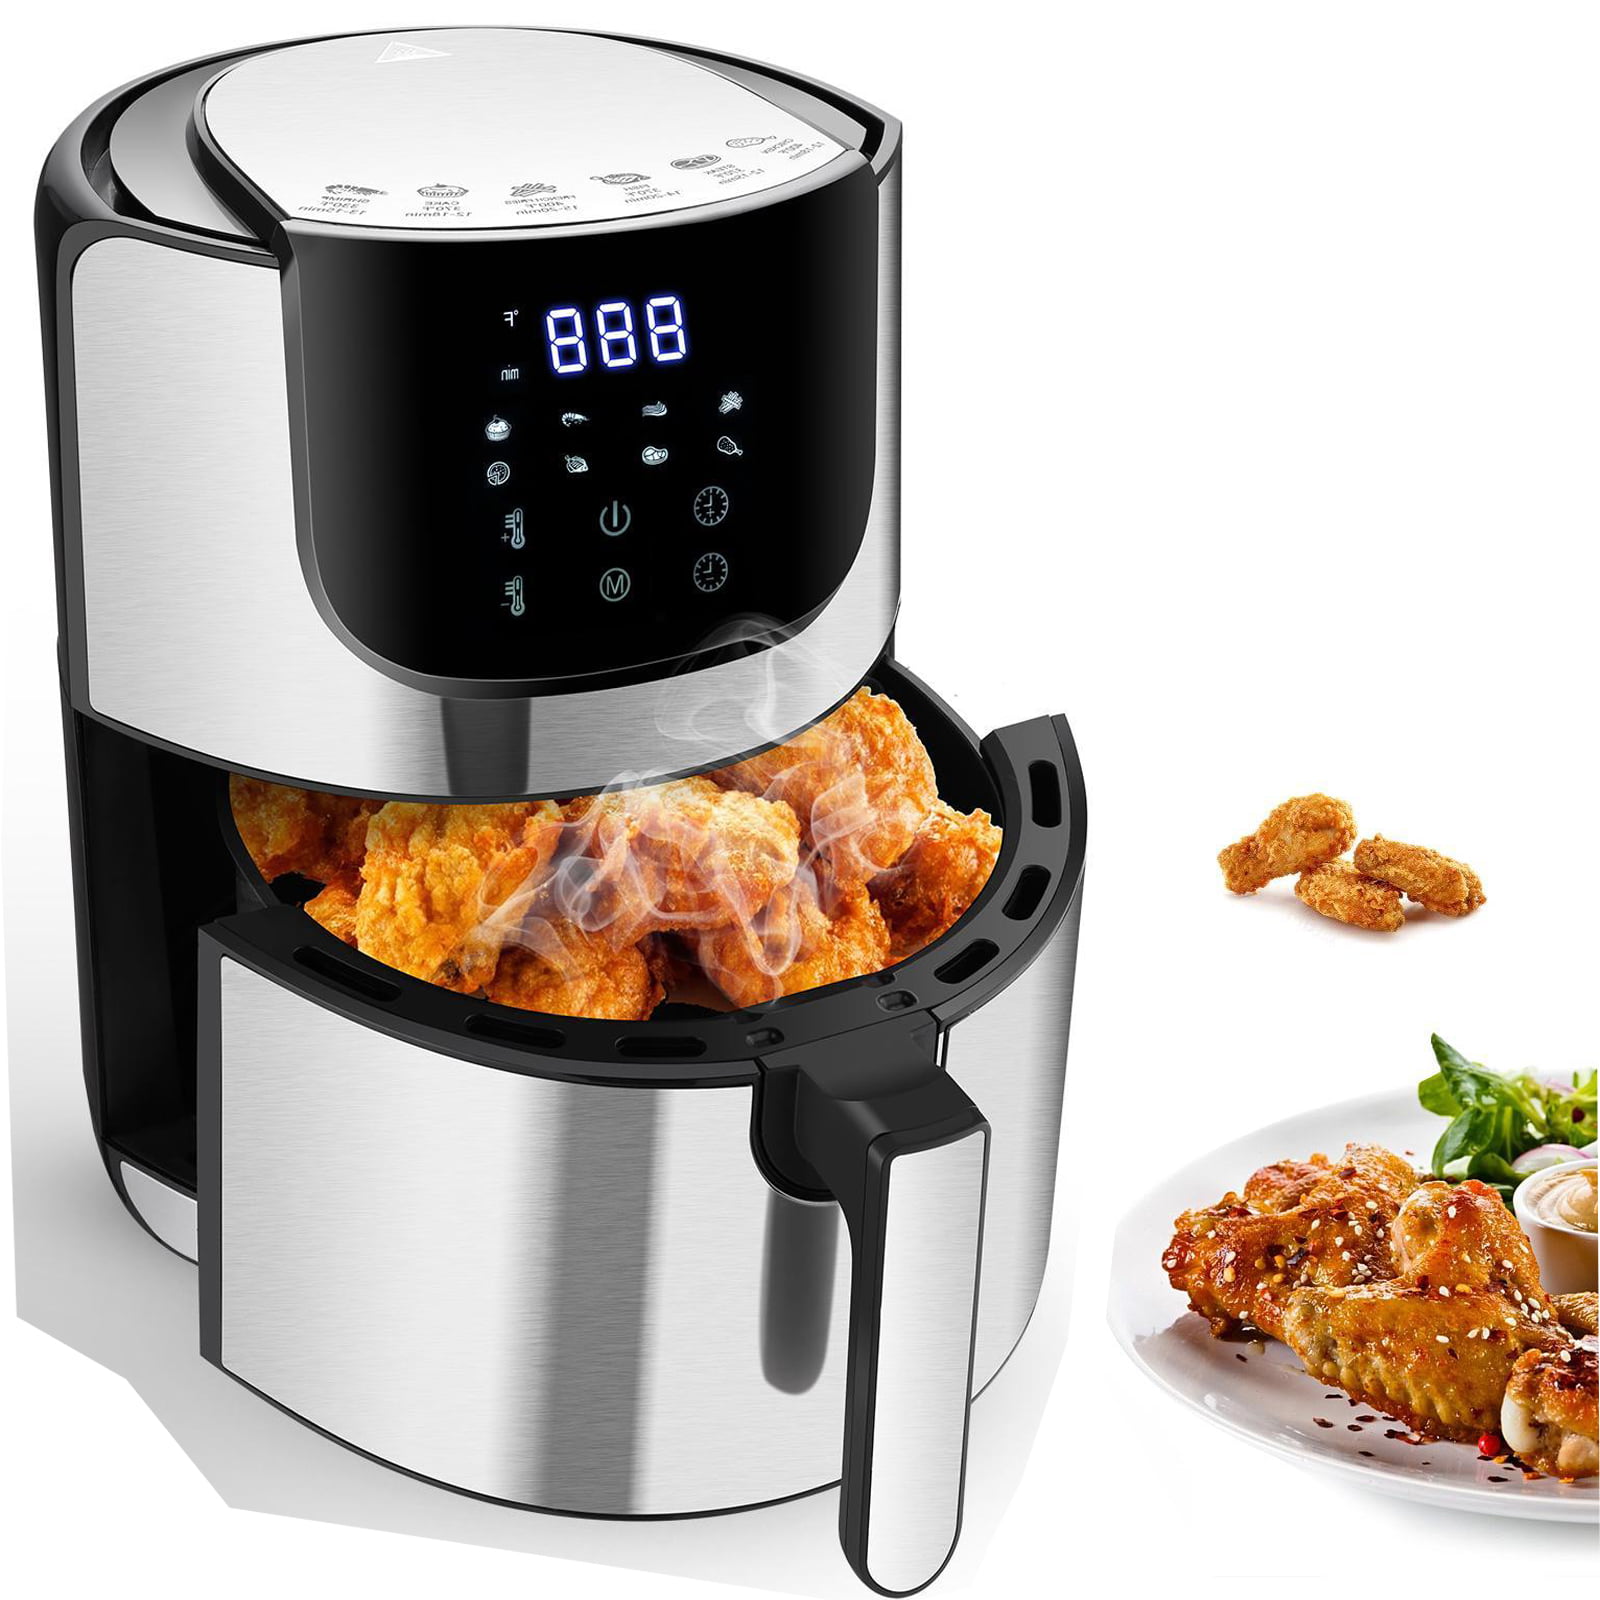 1700W Air Fryer Oven XL for Air Frying Roasting Electric Hot Fryer with LED Touchscreen Innsky Air Fryer 5.8QT Preheat & 32 Recipes Book Black 7 Cooking Presets 